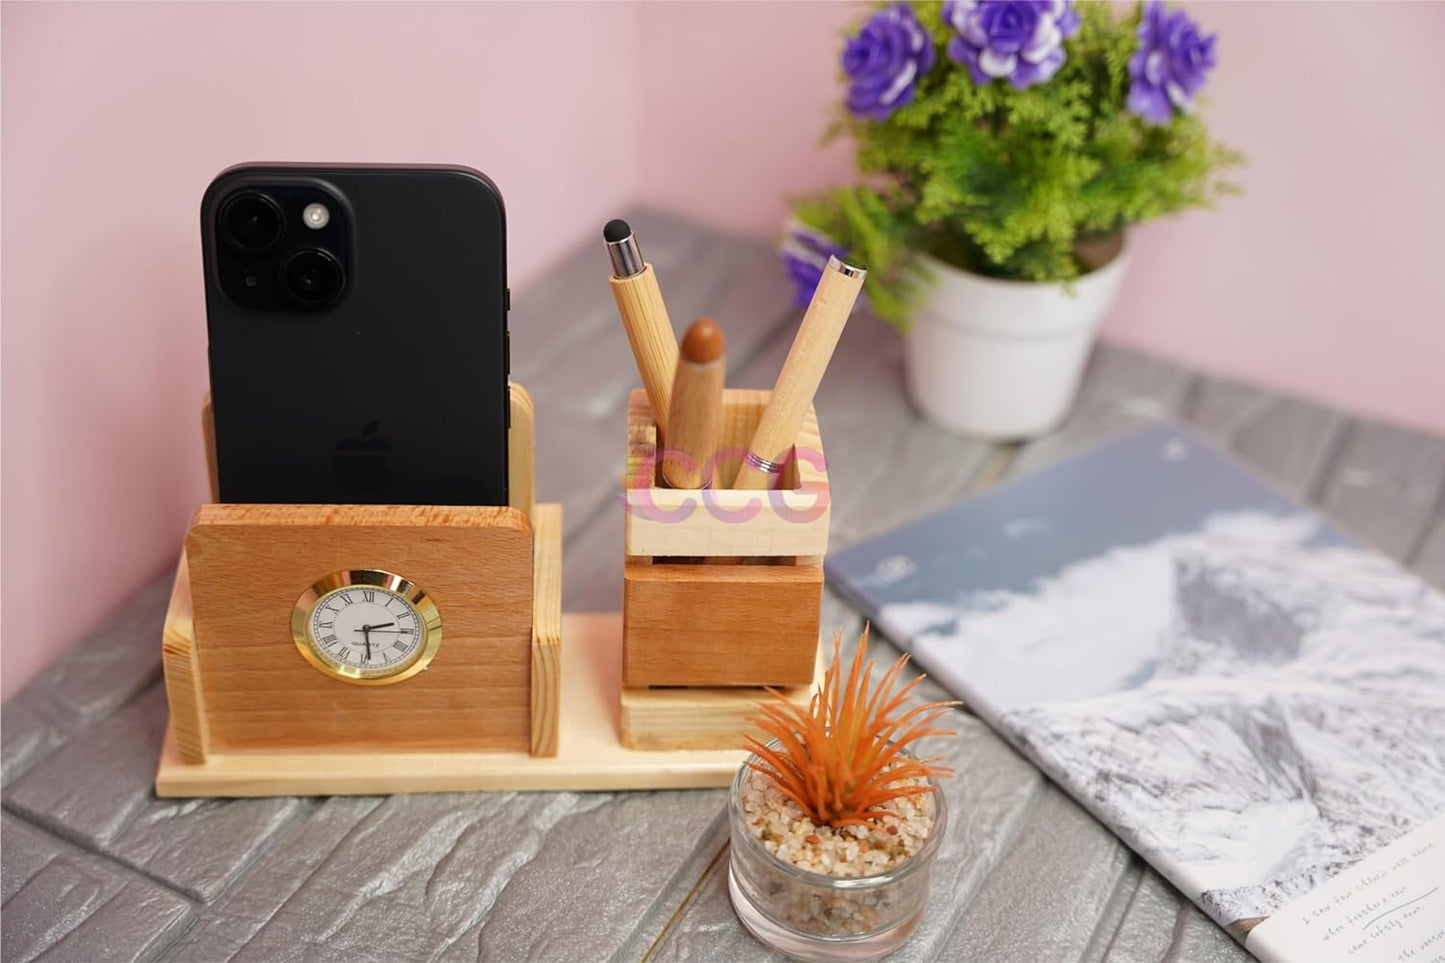 Craft Closet & Gifts - Wooden Pen/Pencil Holder Stand with Mobile Slot and Clock - Personalized Office Accessory for IAS, Advocate, Office & Corporate Gifts